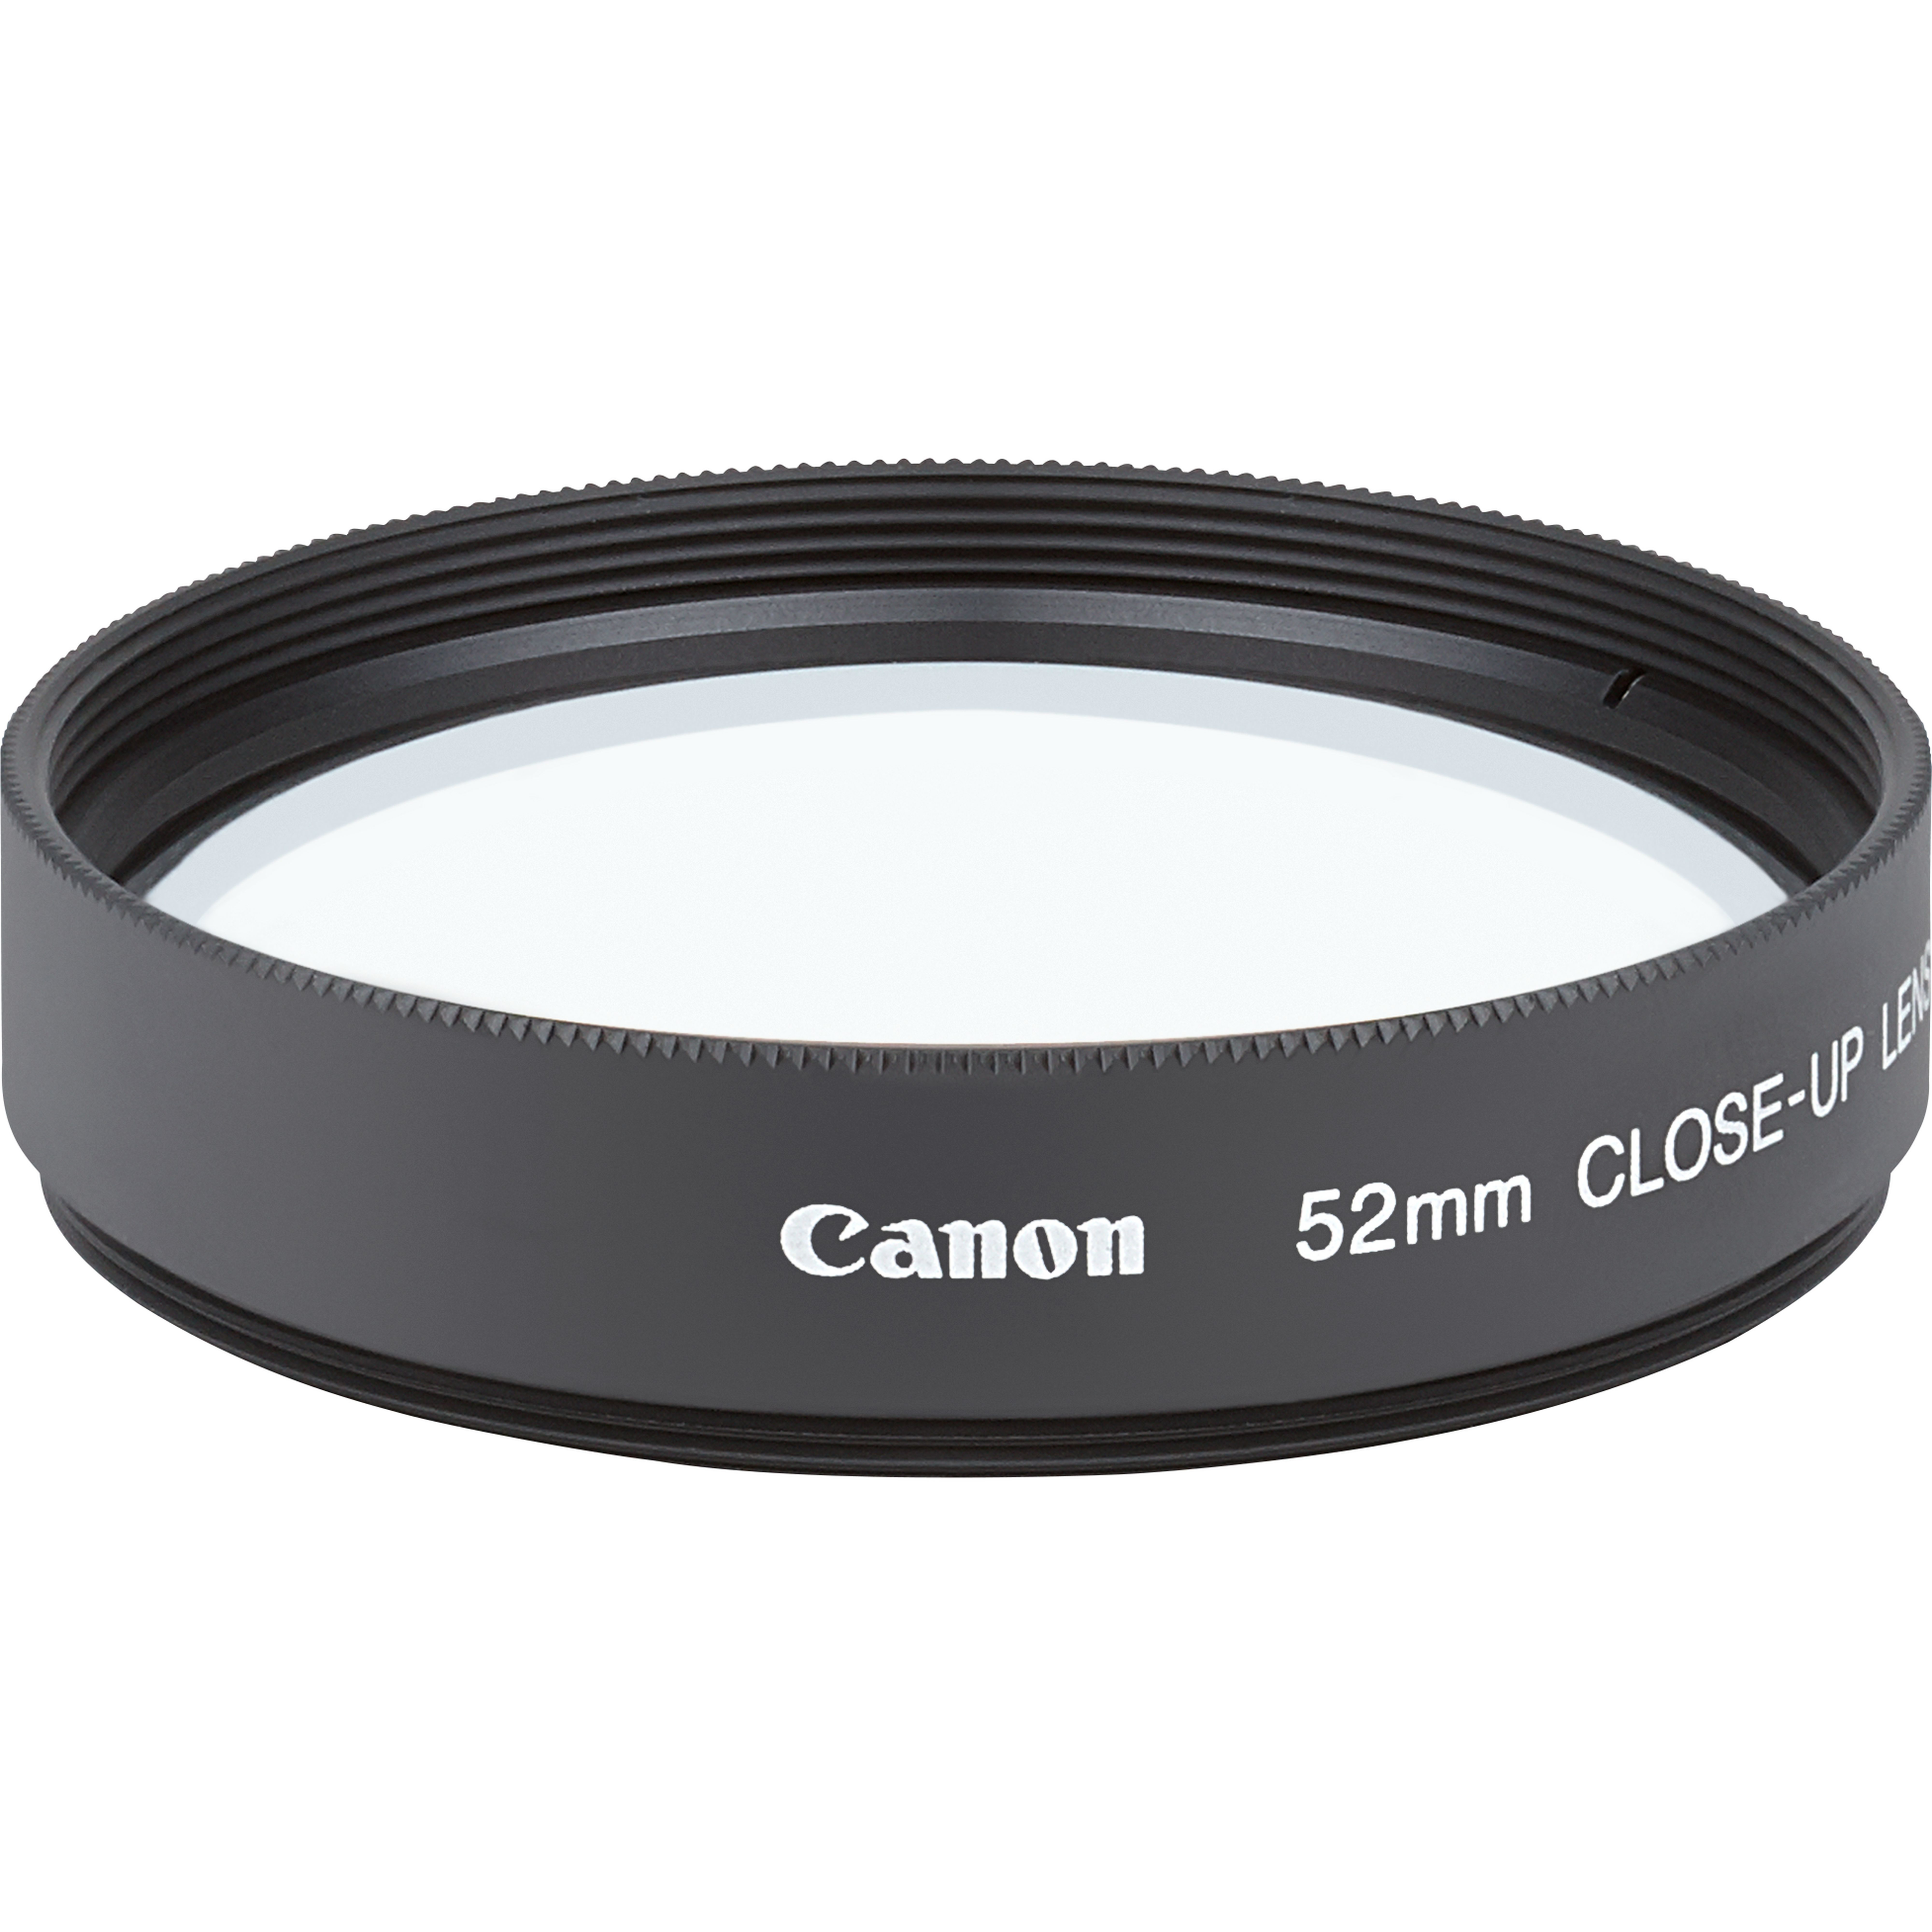 Canon - Converter - for PowerShot A10, A20, A530, A540, A75, A80, A85, A95, S1 IS